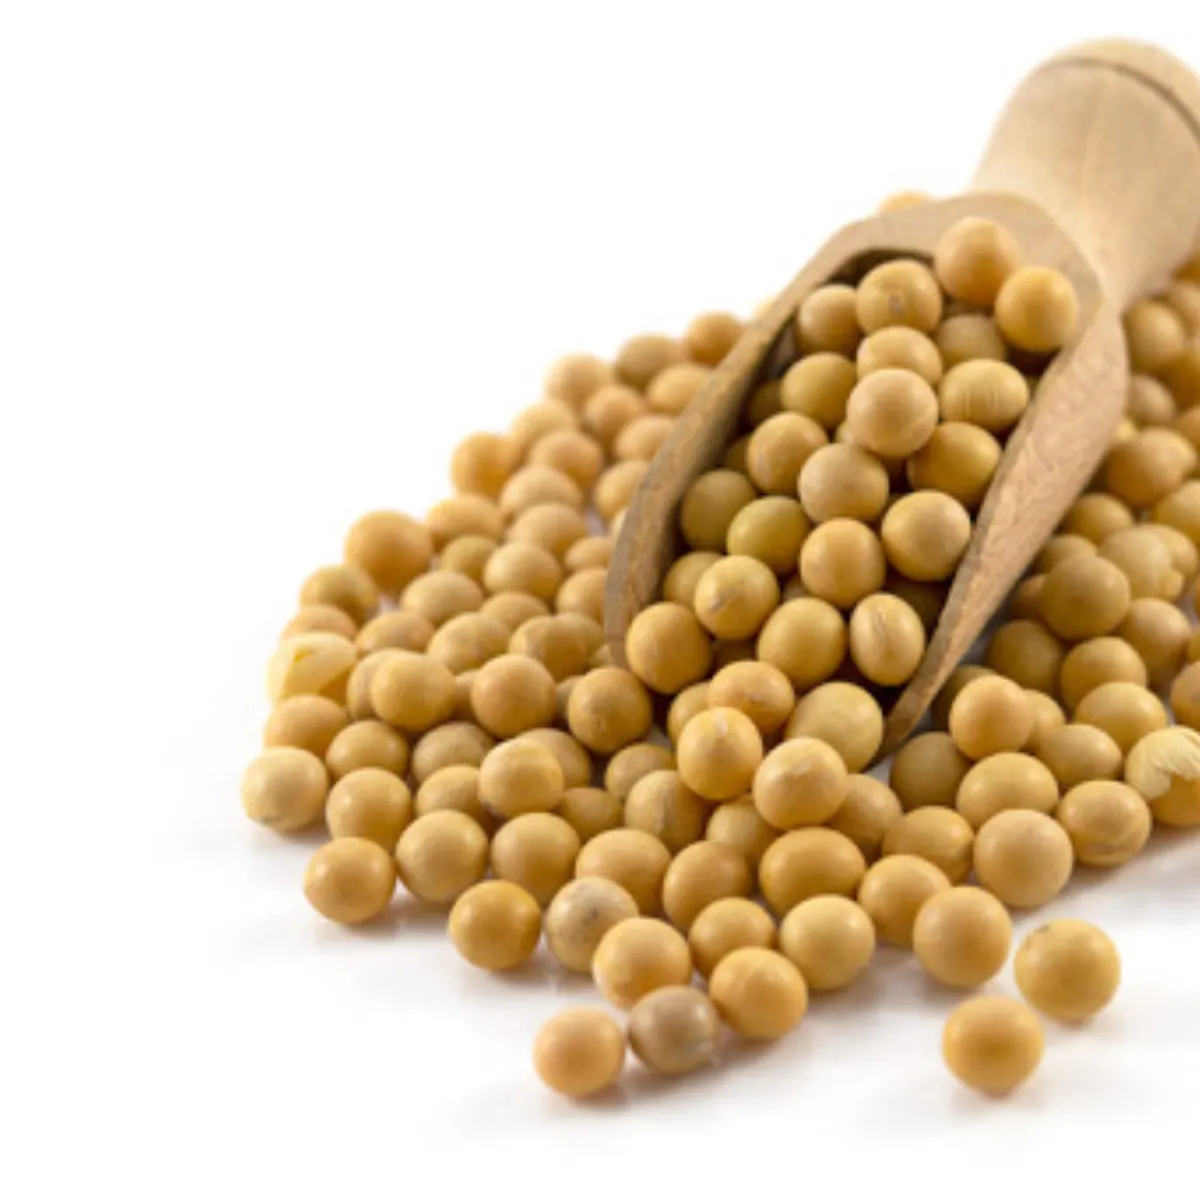 Yellow Soybeans - Soybeans /Soya Bean (8.0mm) with High Quality Non Gmo